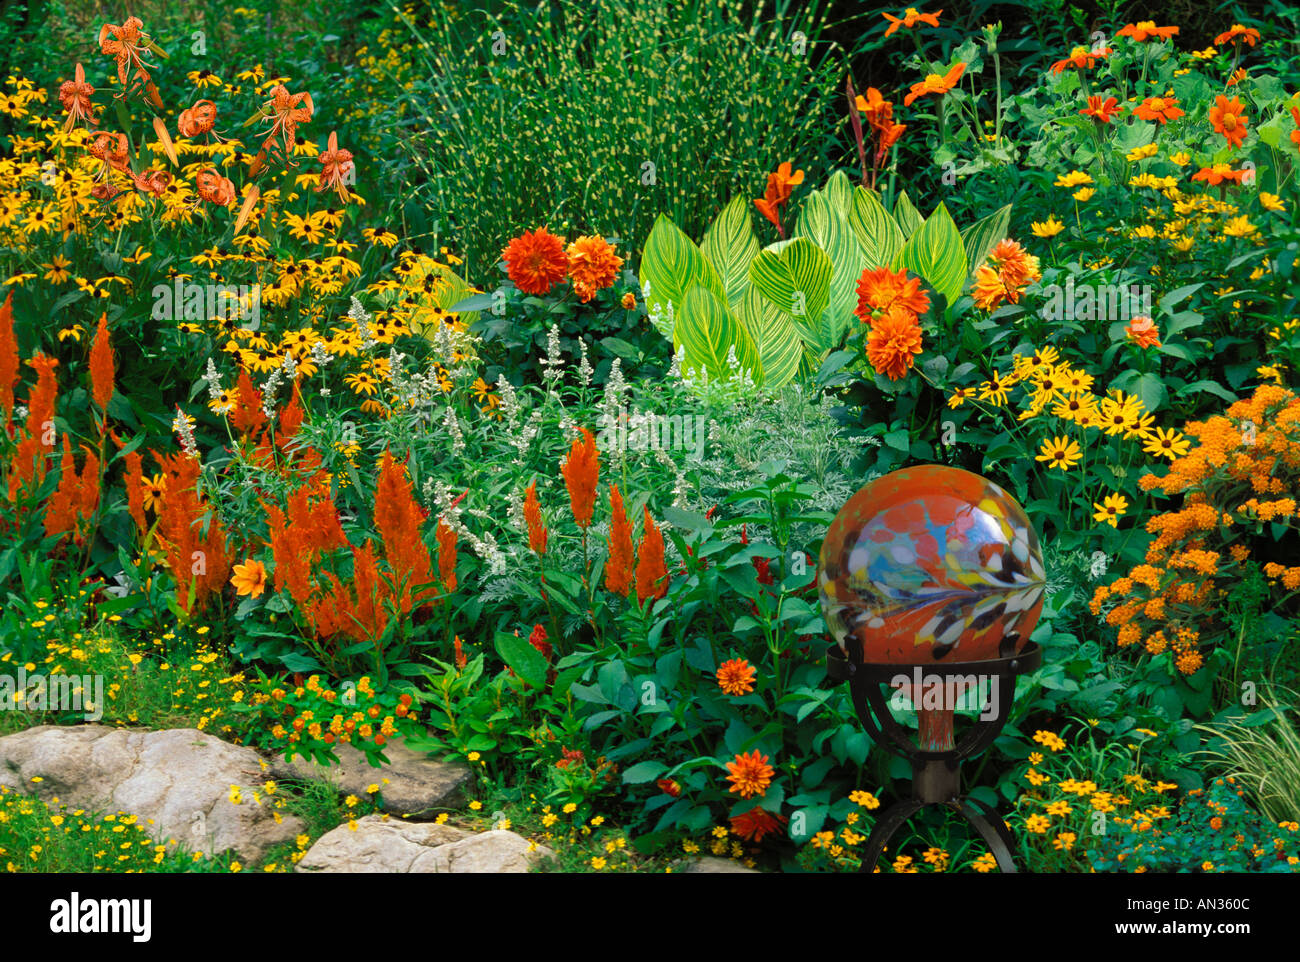 A blooming summer flower garden with a glass gazing globe of orange-yellow colors and vibrant flowers, Missouri USA Stock Photo